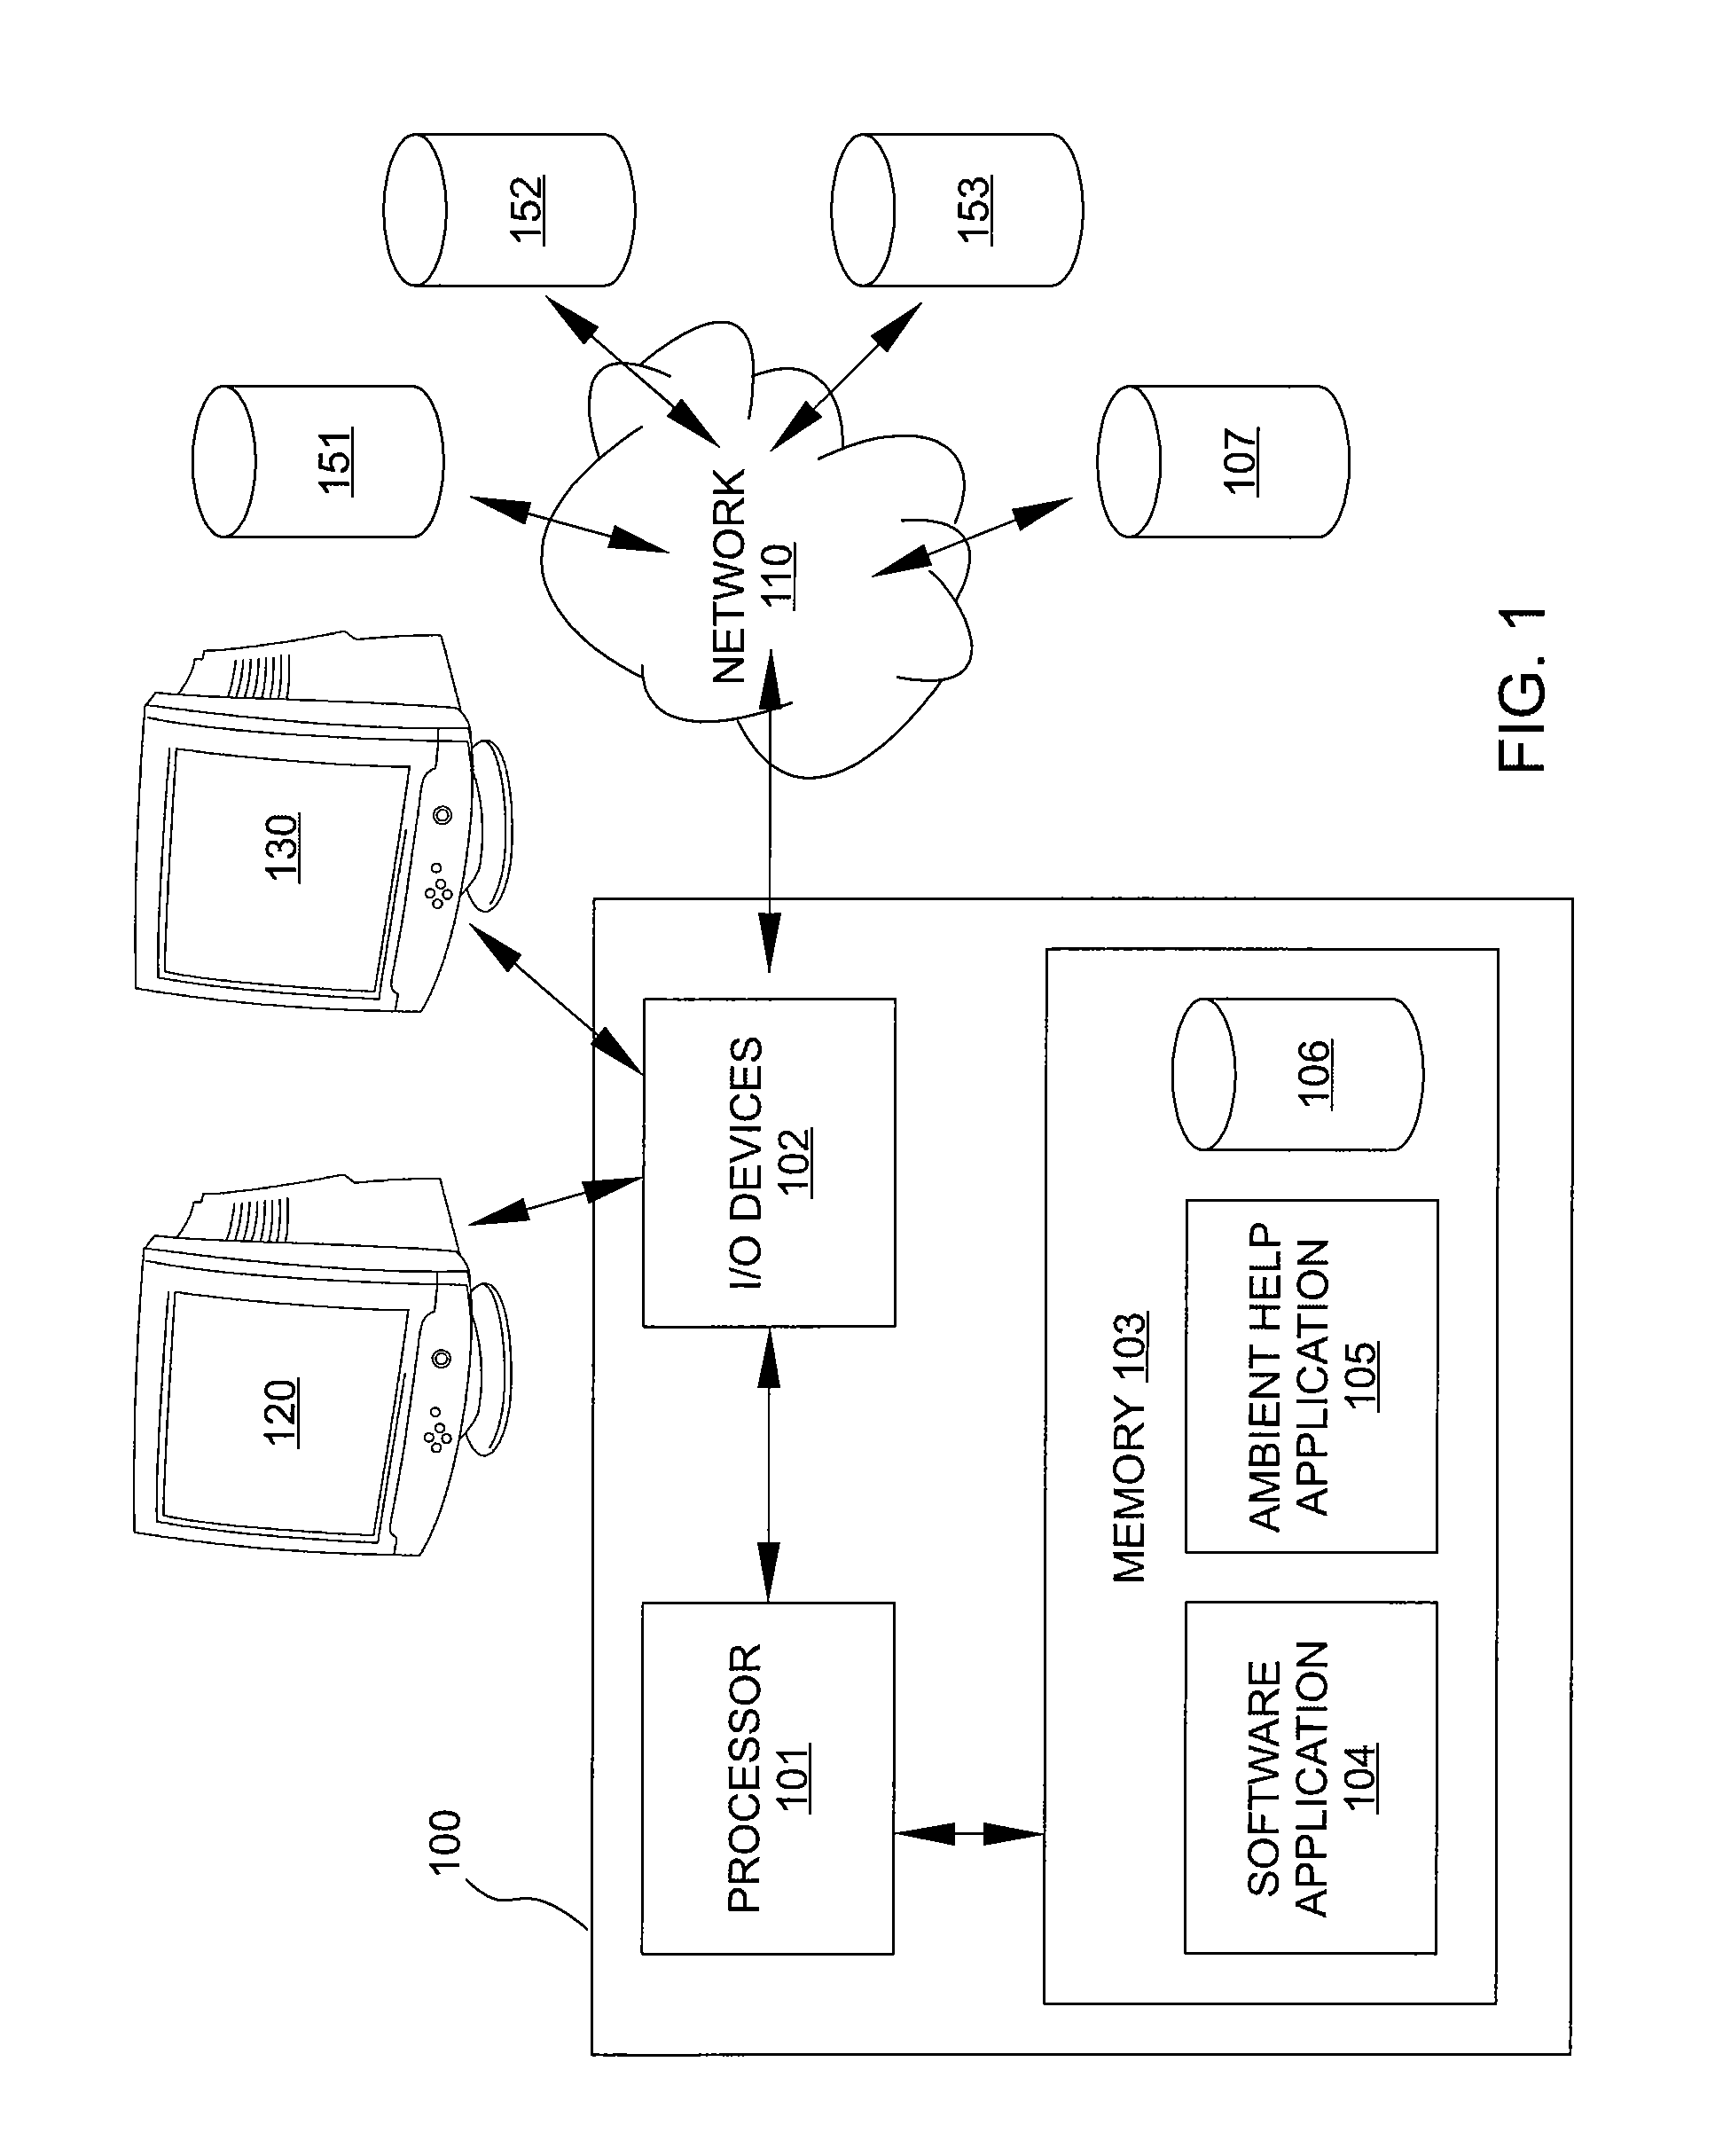 Method of Providing Instructional Material While A Software Application is in Use